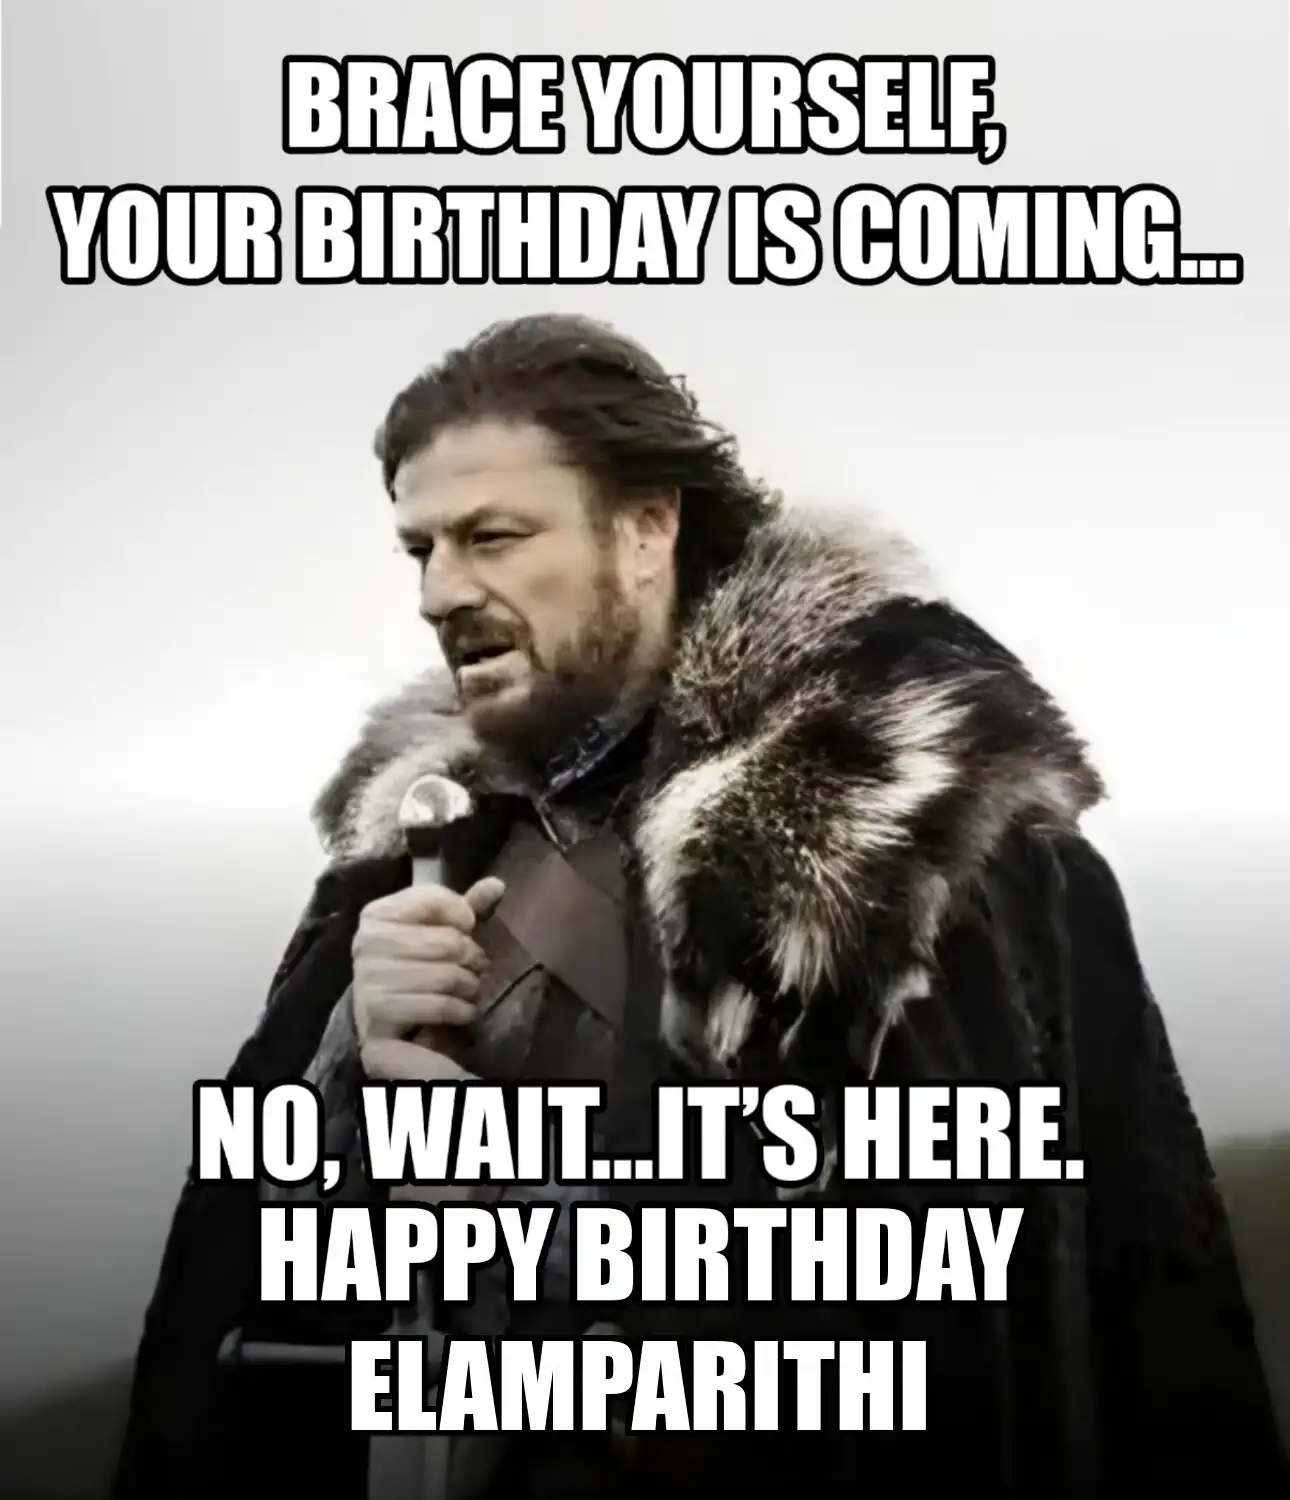 Happy Birthday Elamparithi Brace Yourself Your Birthday Is Coming Meme